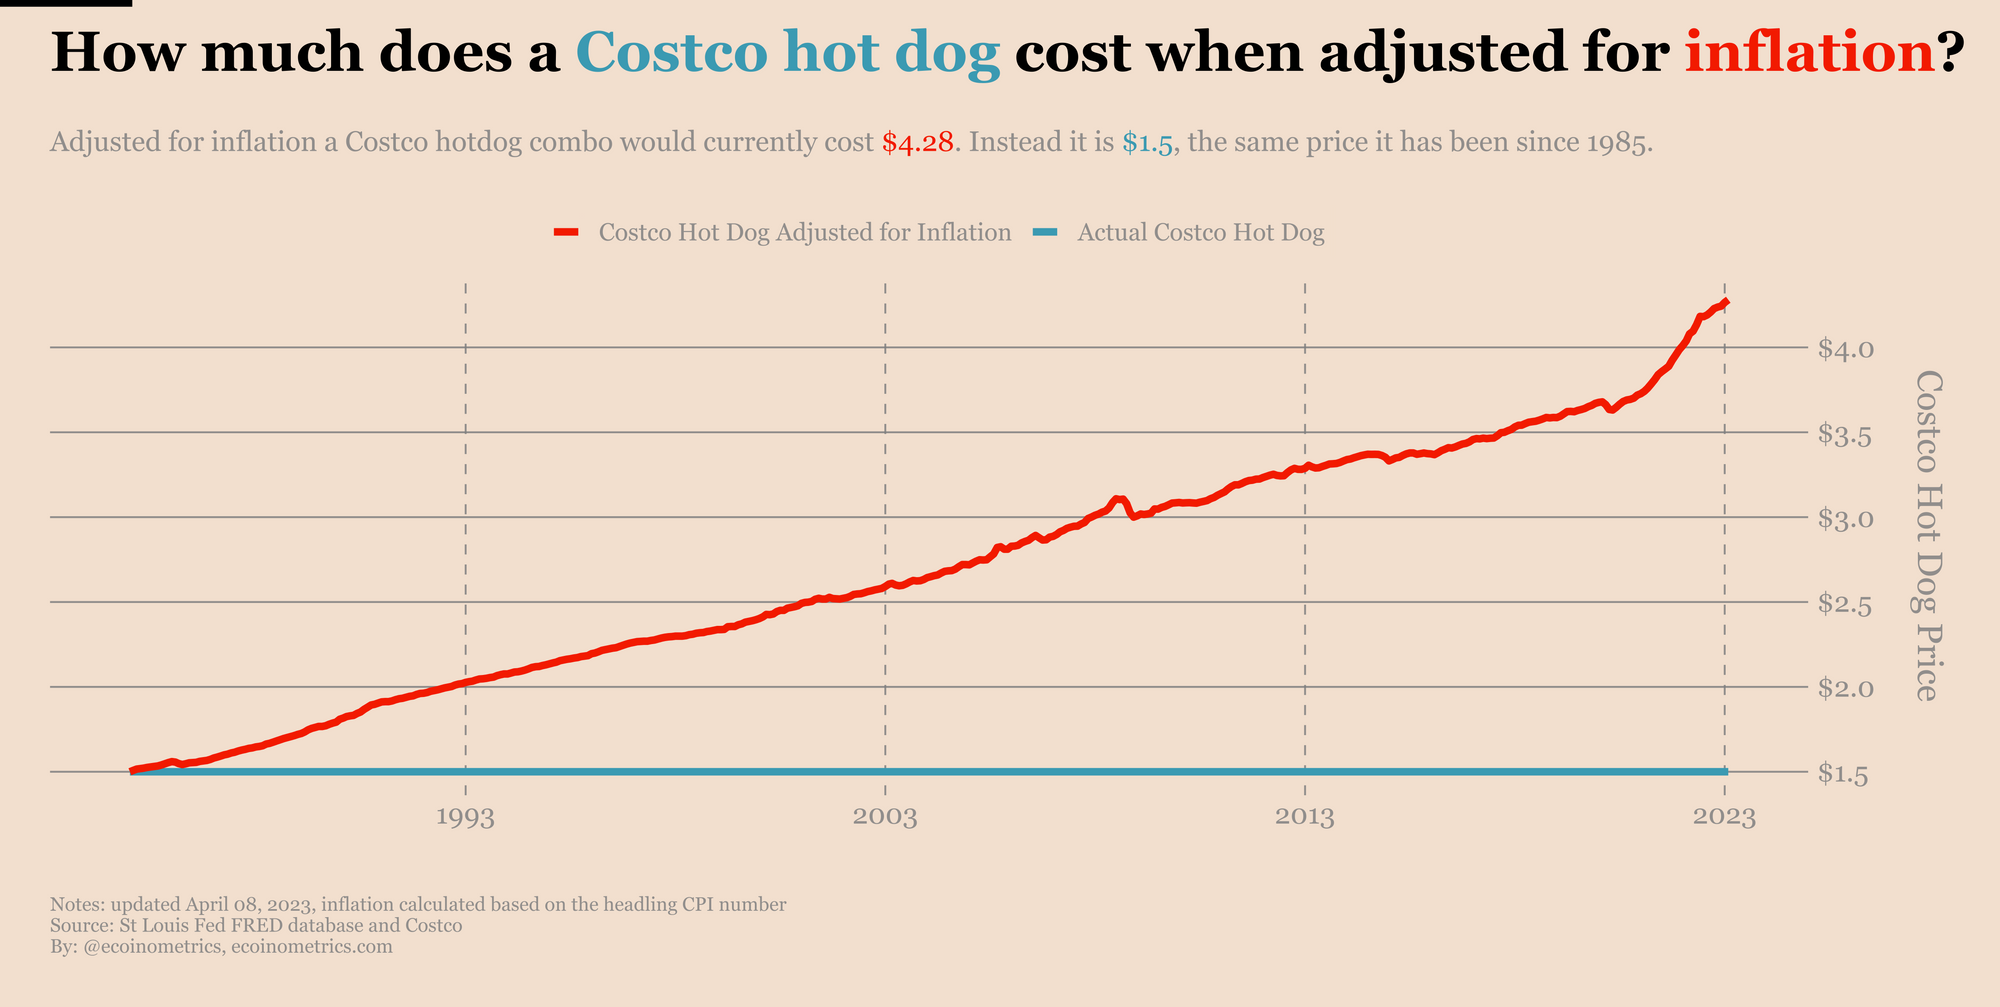 Evolution of the price of a Costco hot dog when adjusted for inflation.